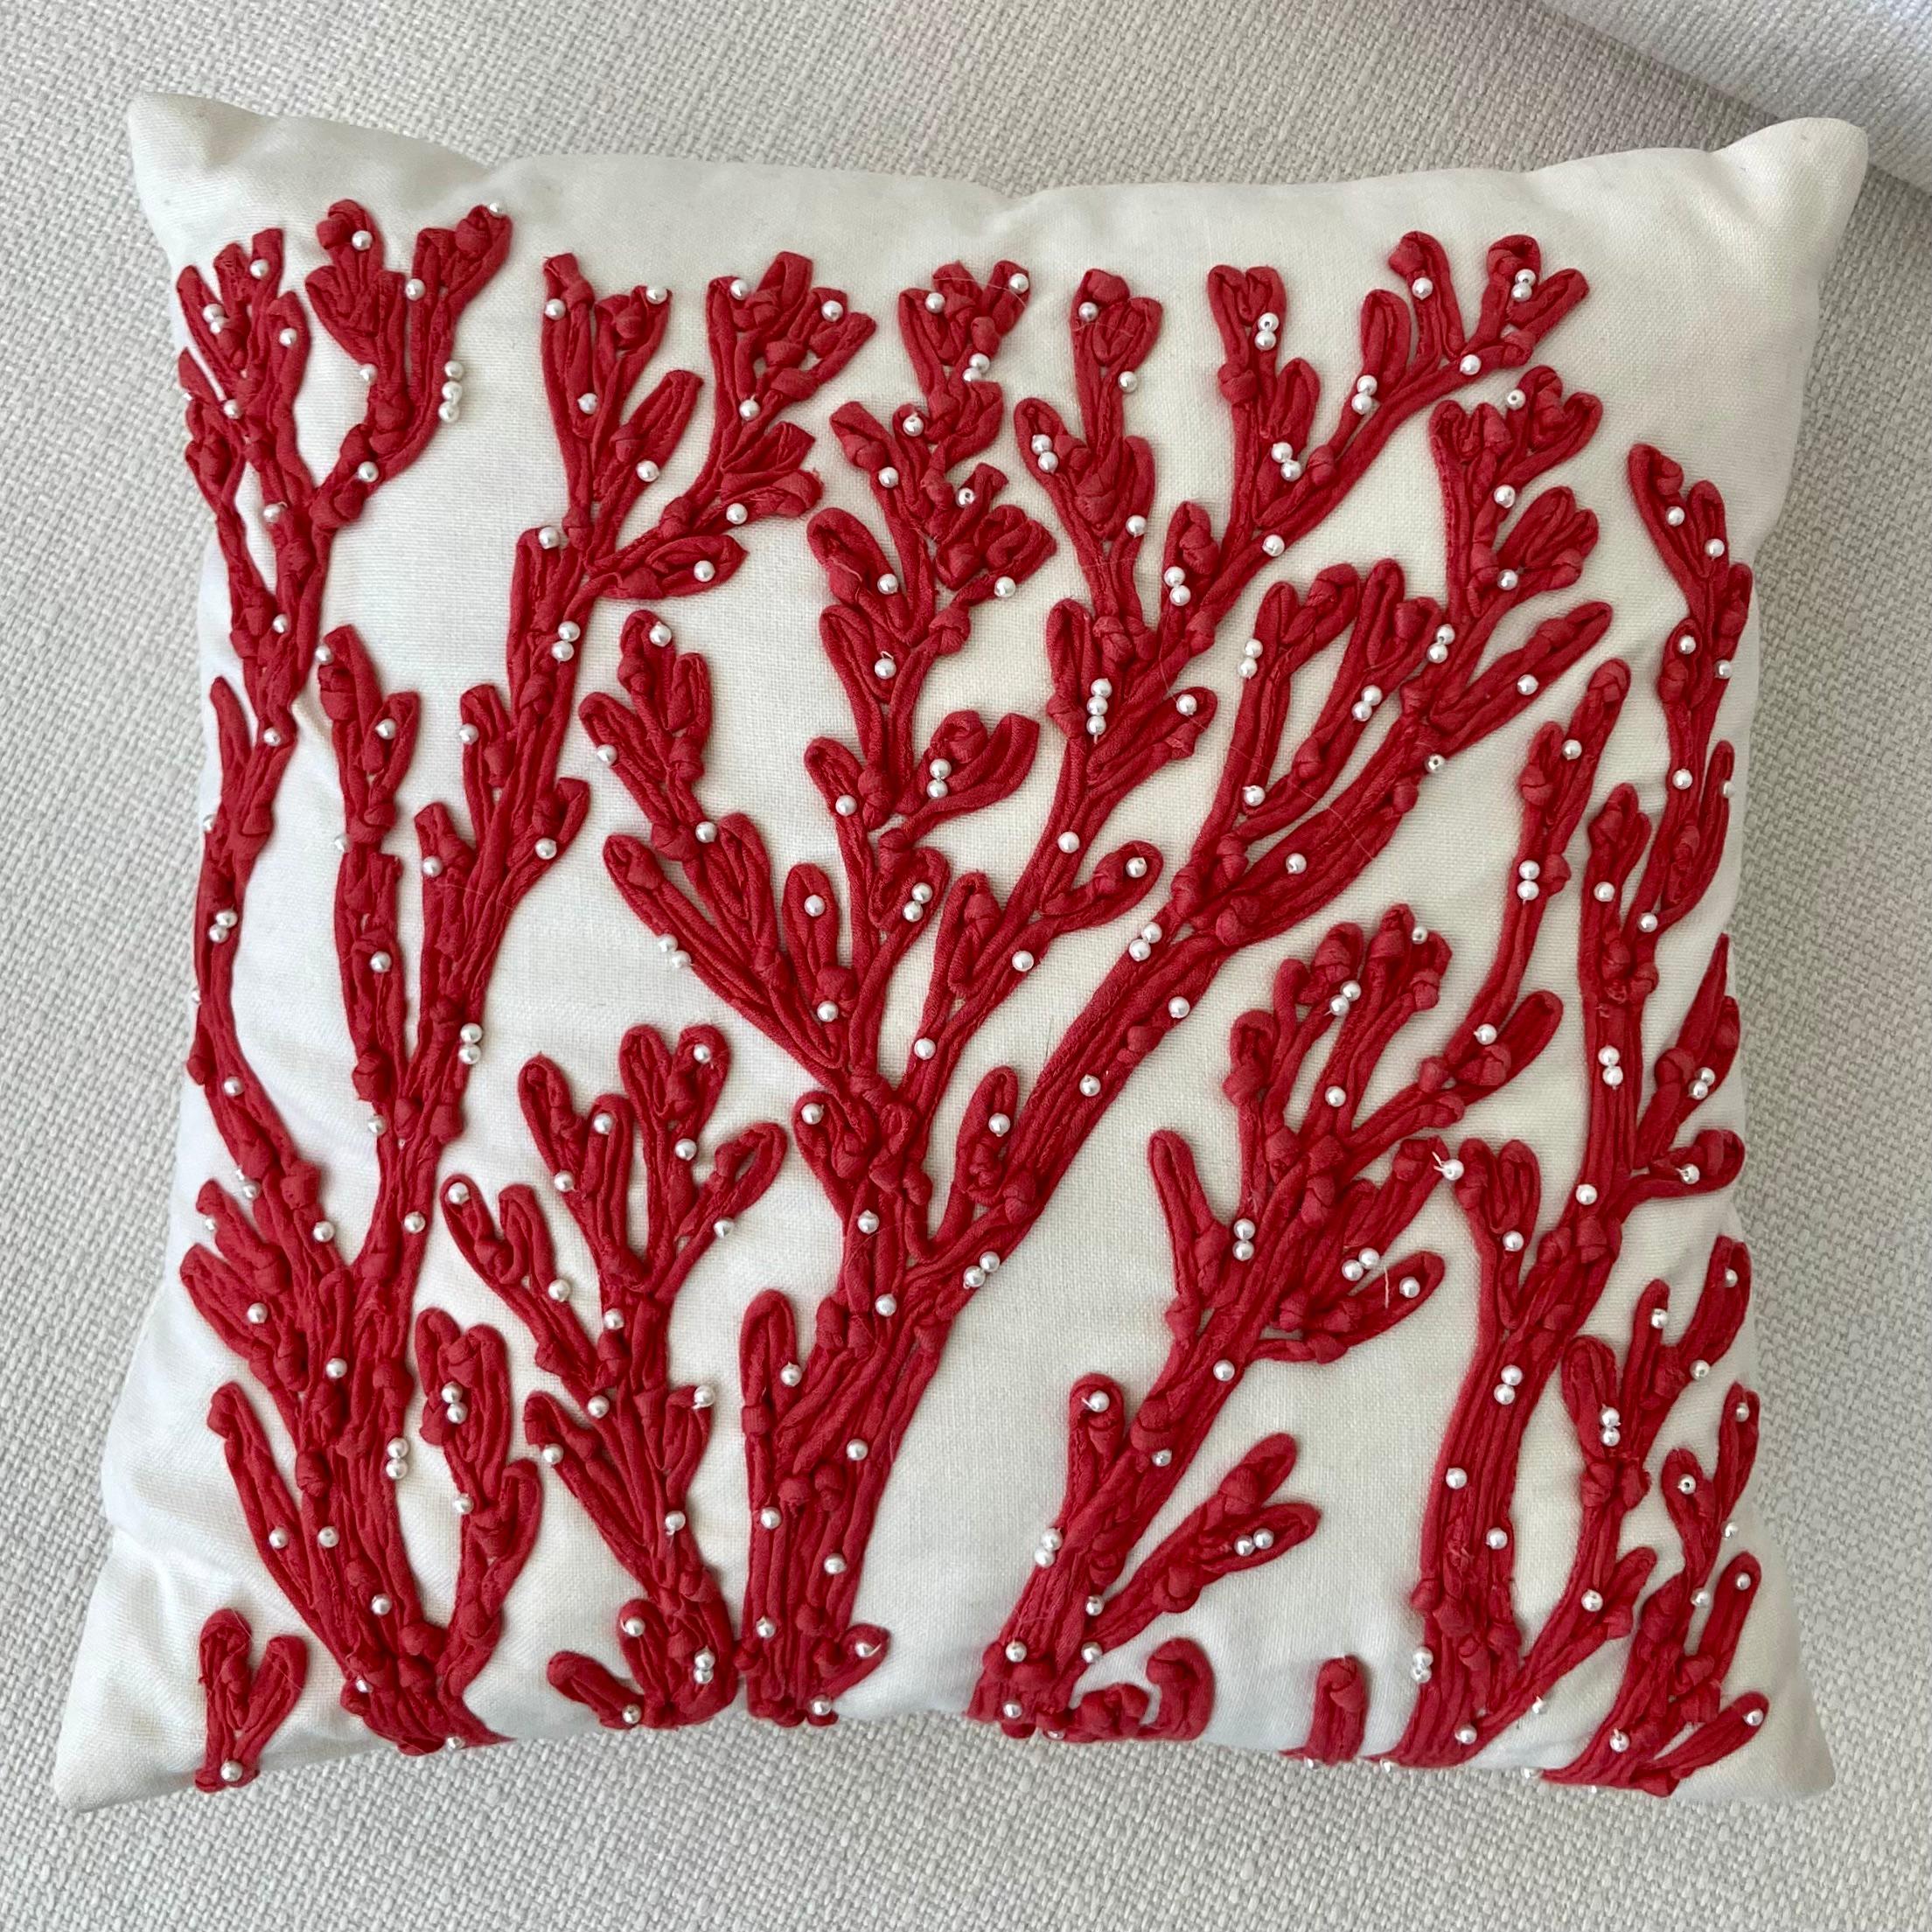 Beautiful and fun coral embroidered pillow. Great addition to your boho chic inspired interiors. A few age spots but gorgeous embroidered details.